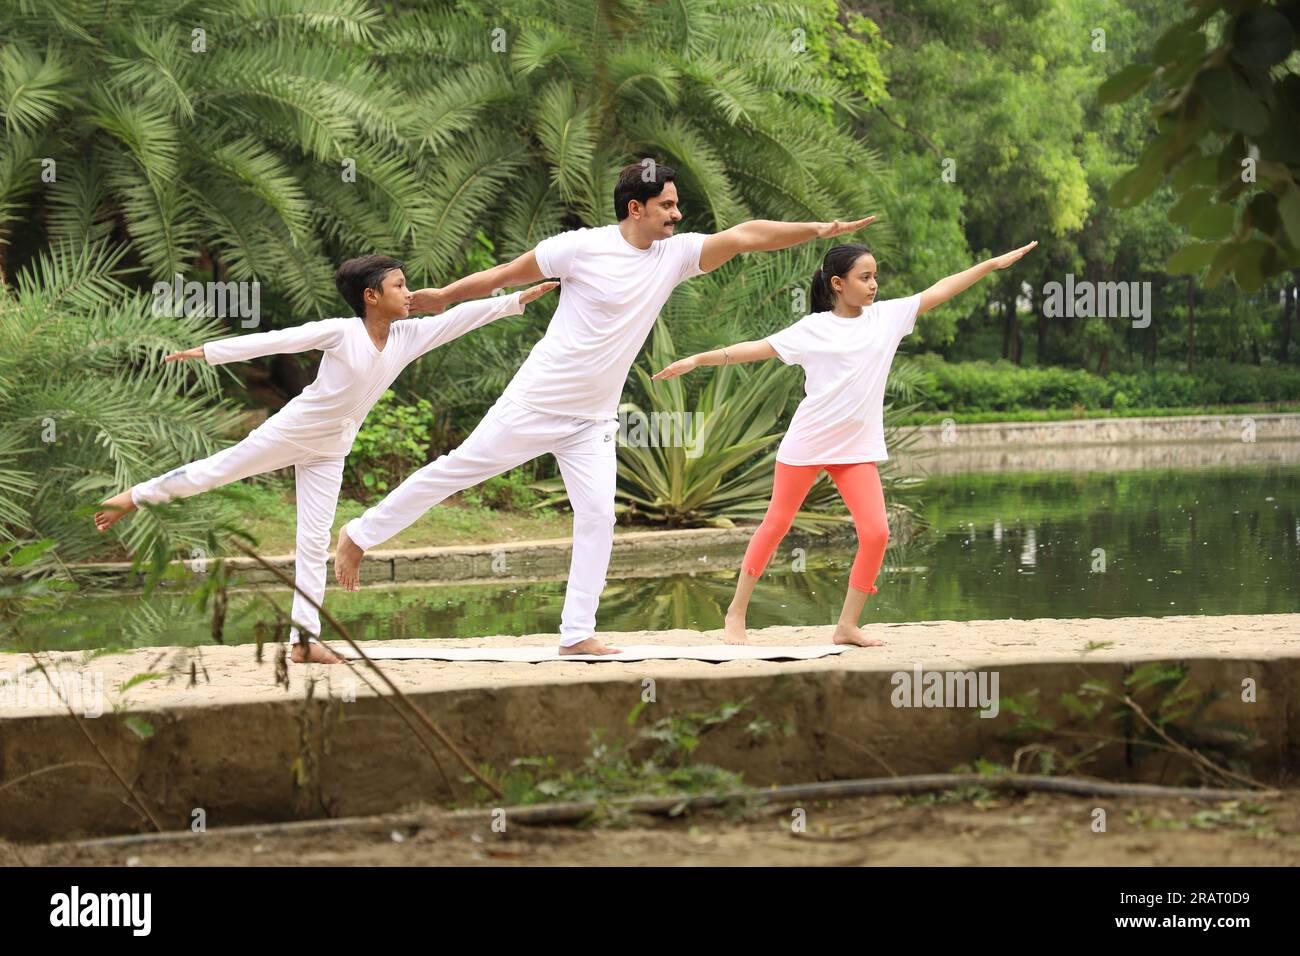 Trainer exercising and teaching kids the yoga poses in green environment early morning in park to maintain healthy lifestyle. International yoga day. Stock Photo